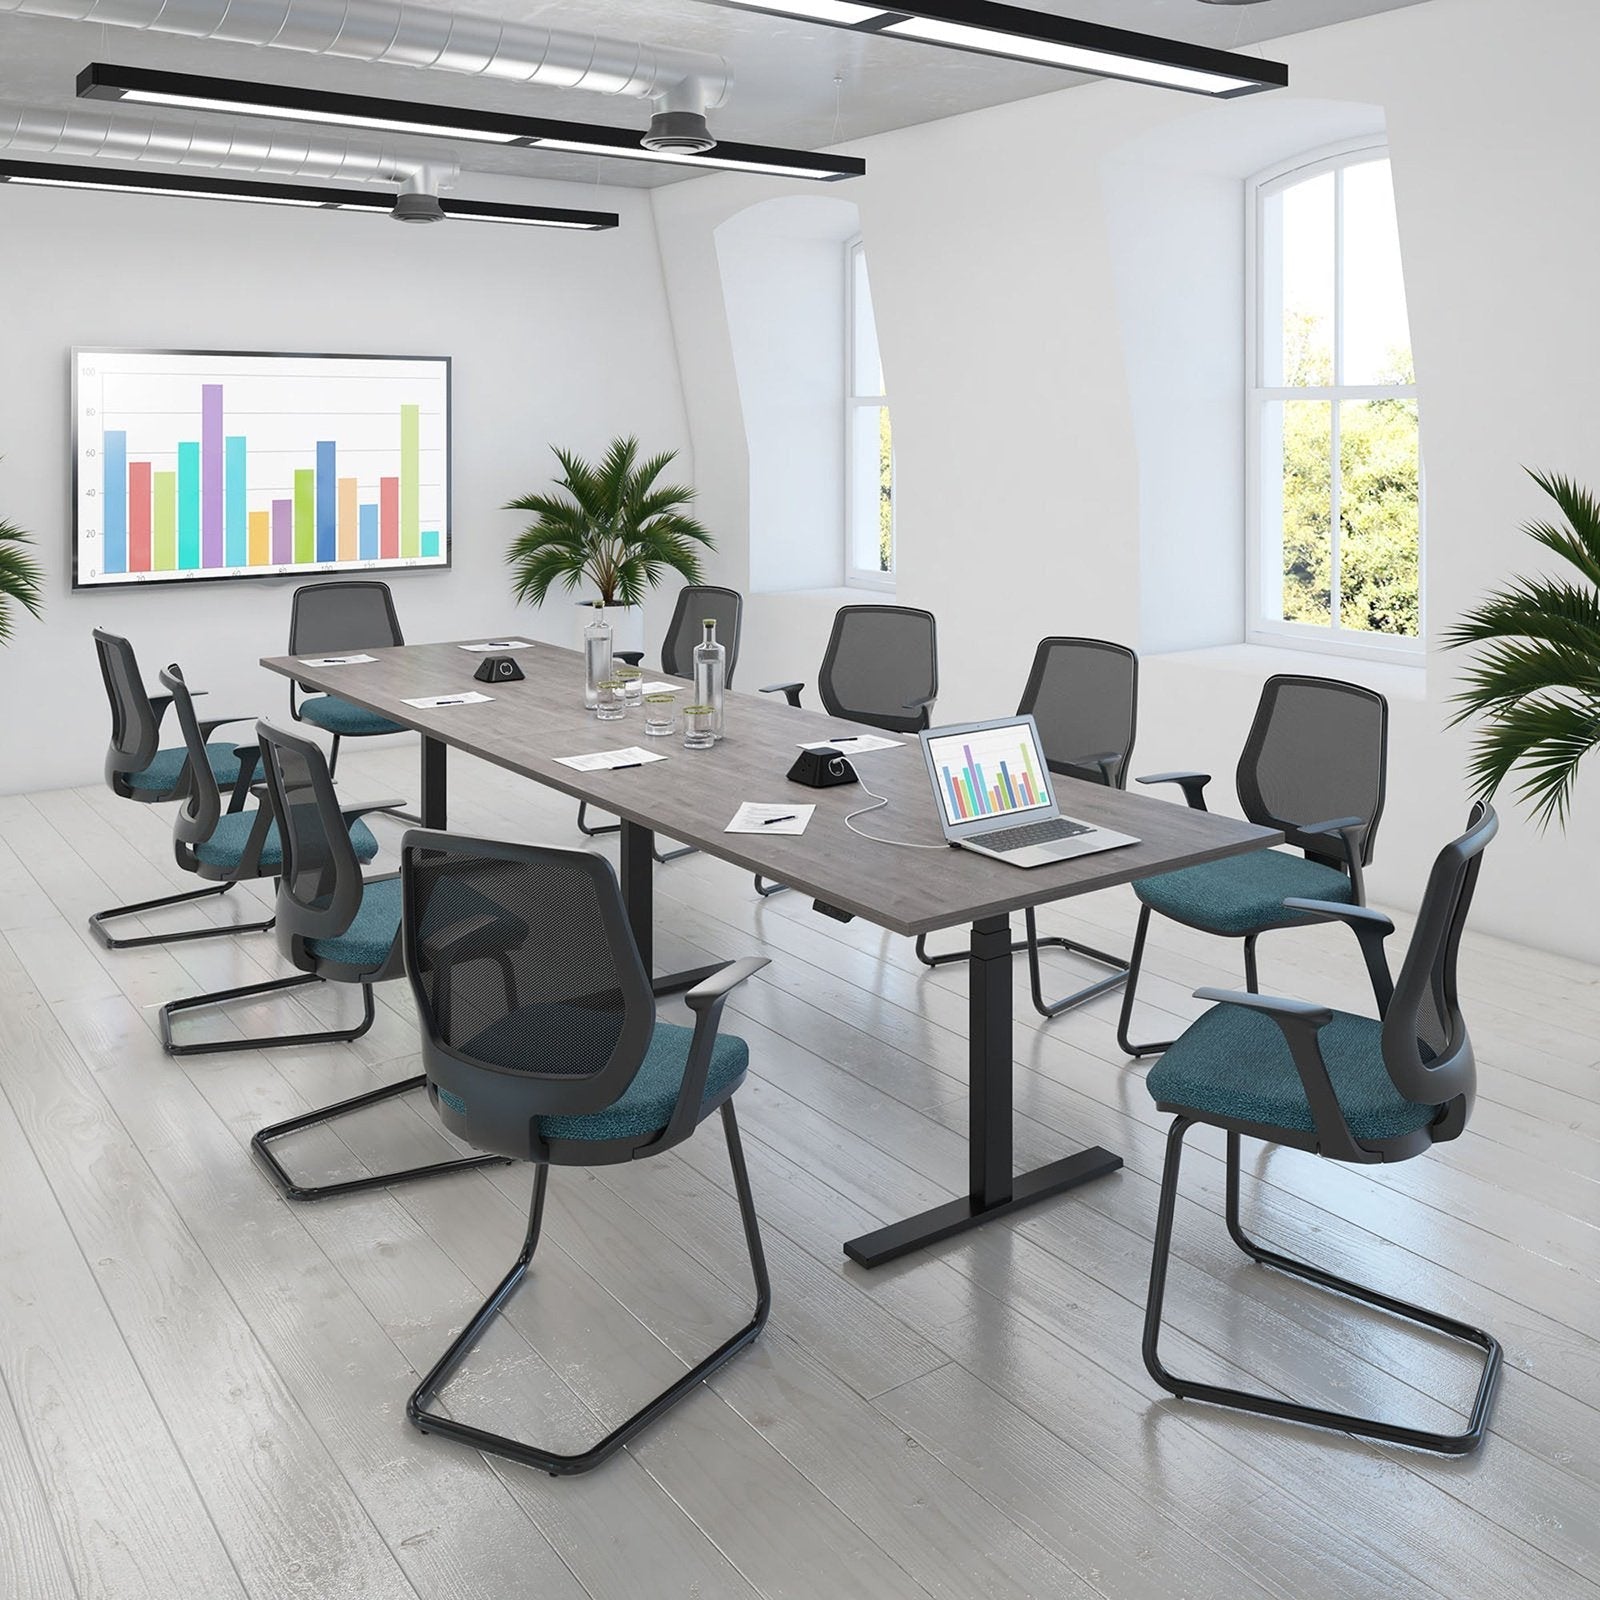 Elev8 Touch boardroom table - Office Products Online